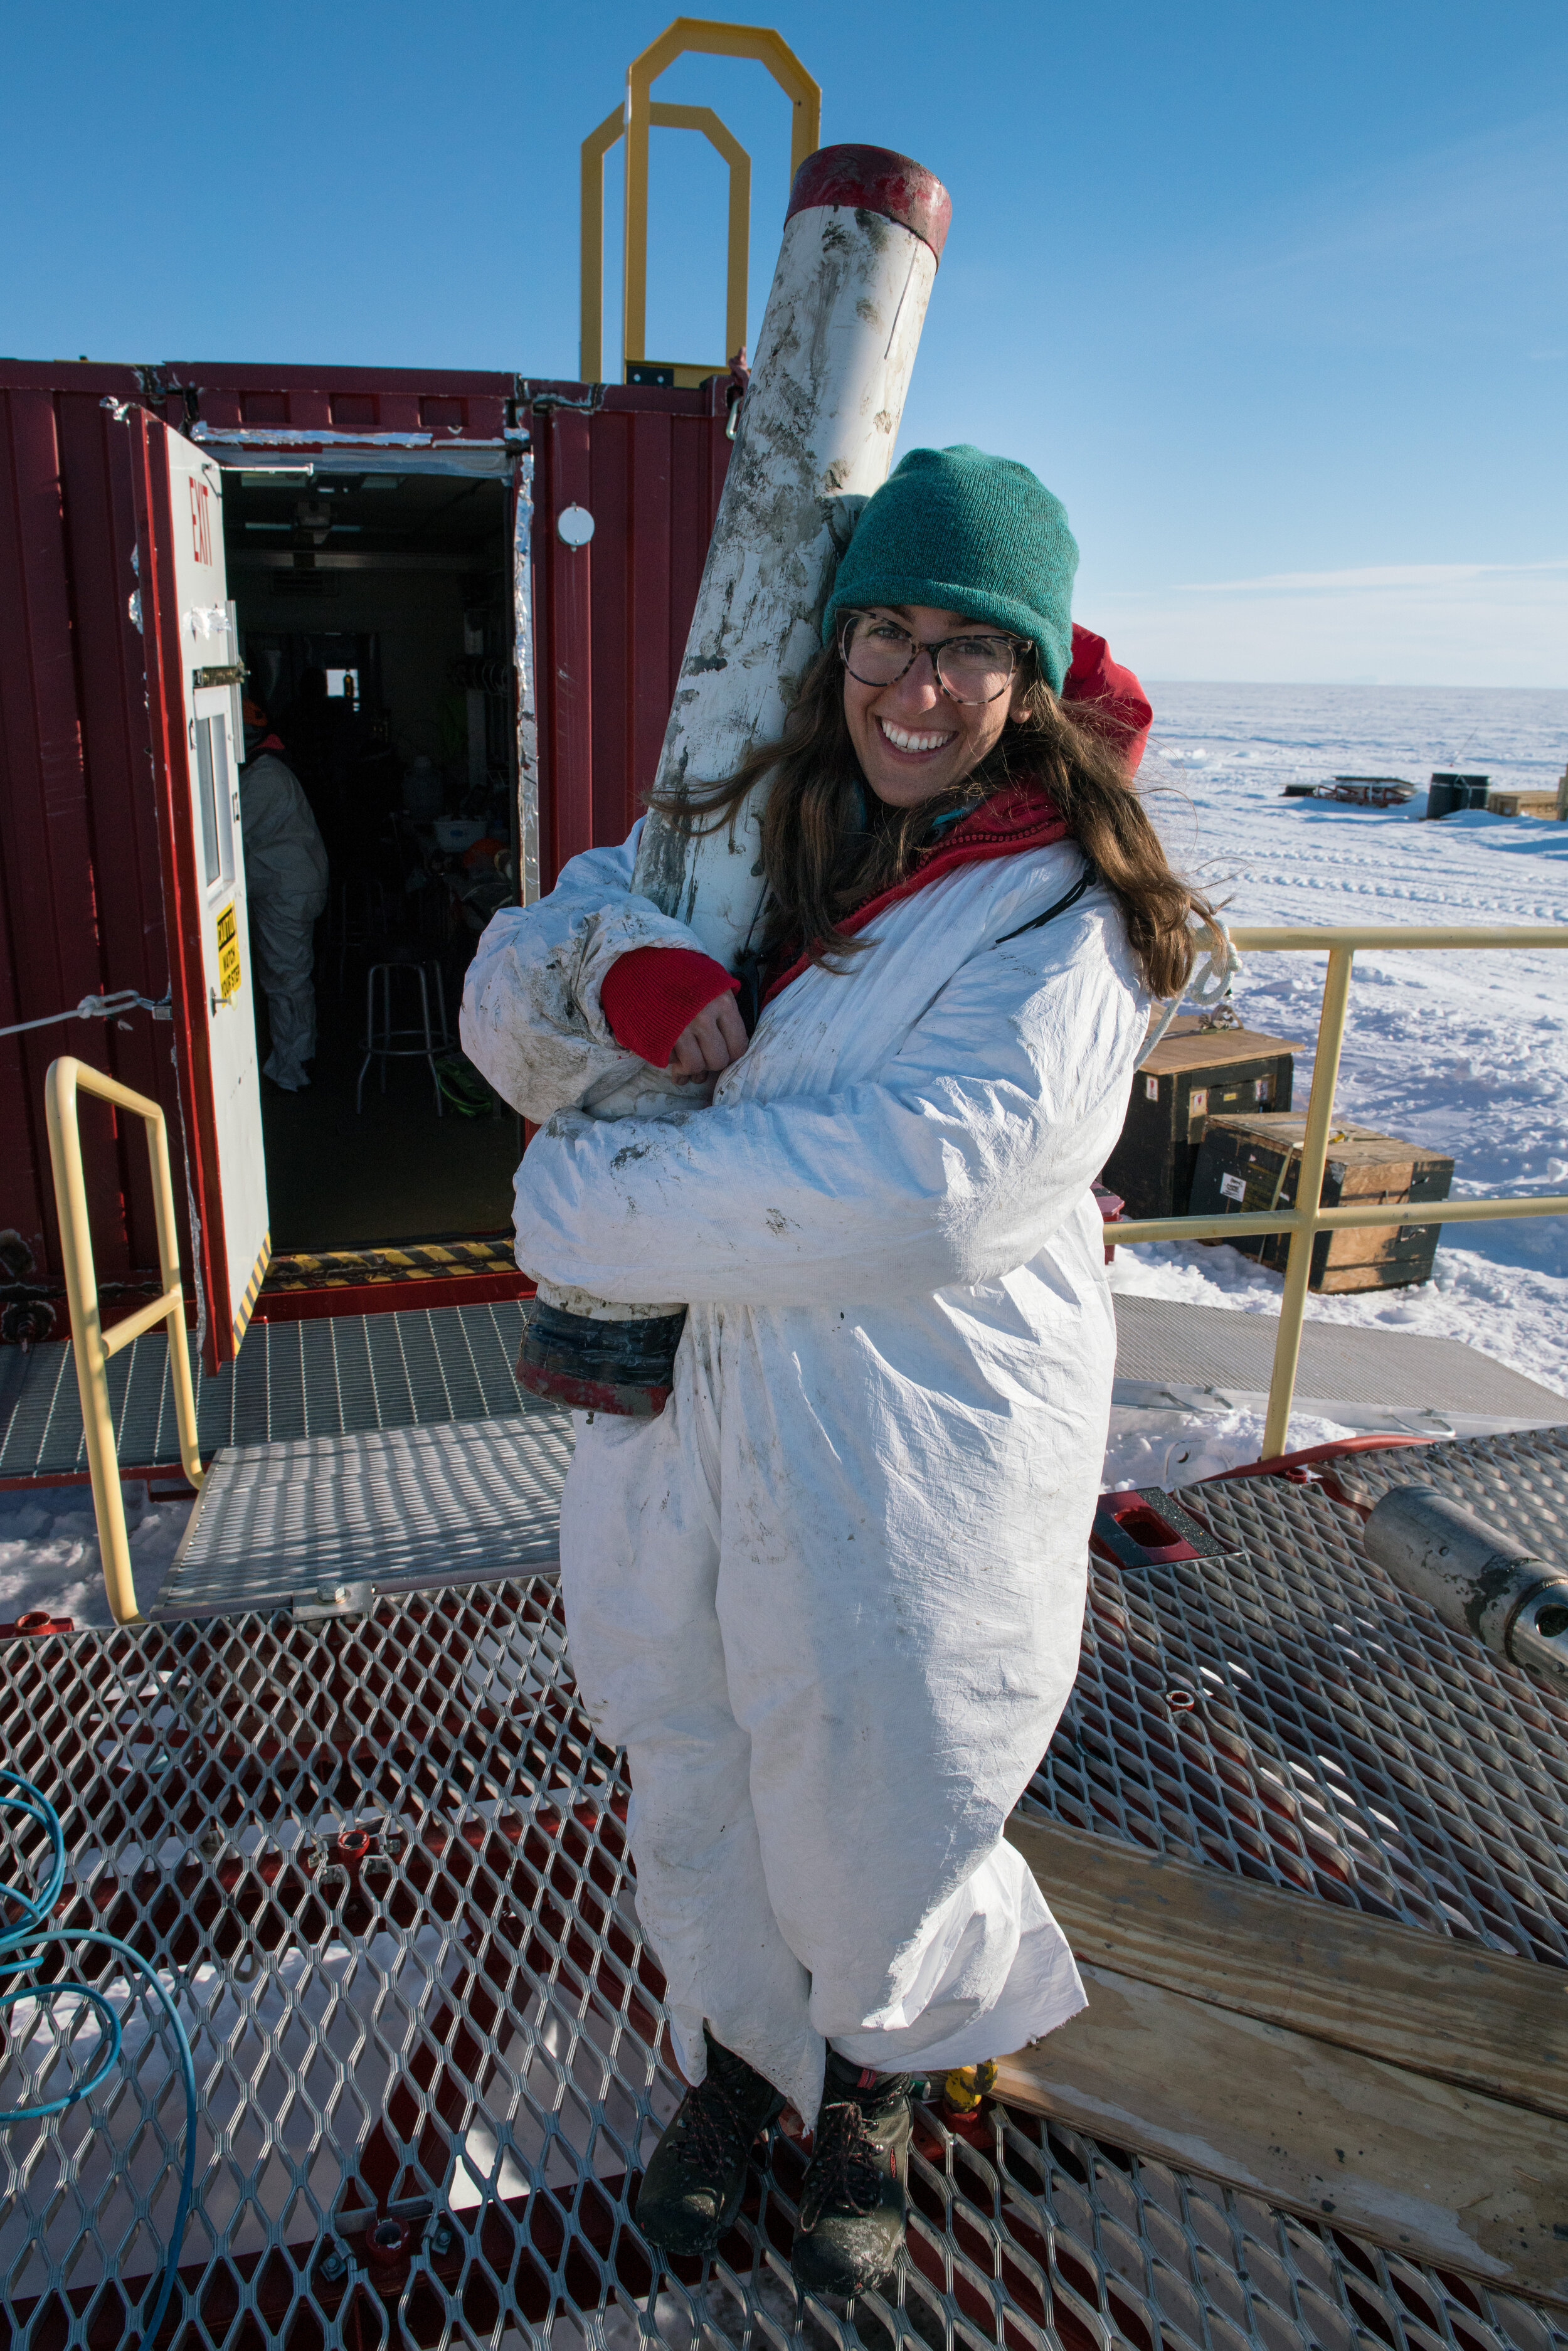 4b - Ryan Venturelli with the First ever Gravity Core From a Subglacial Lake - Billy Collins - DSC03457.jpg